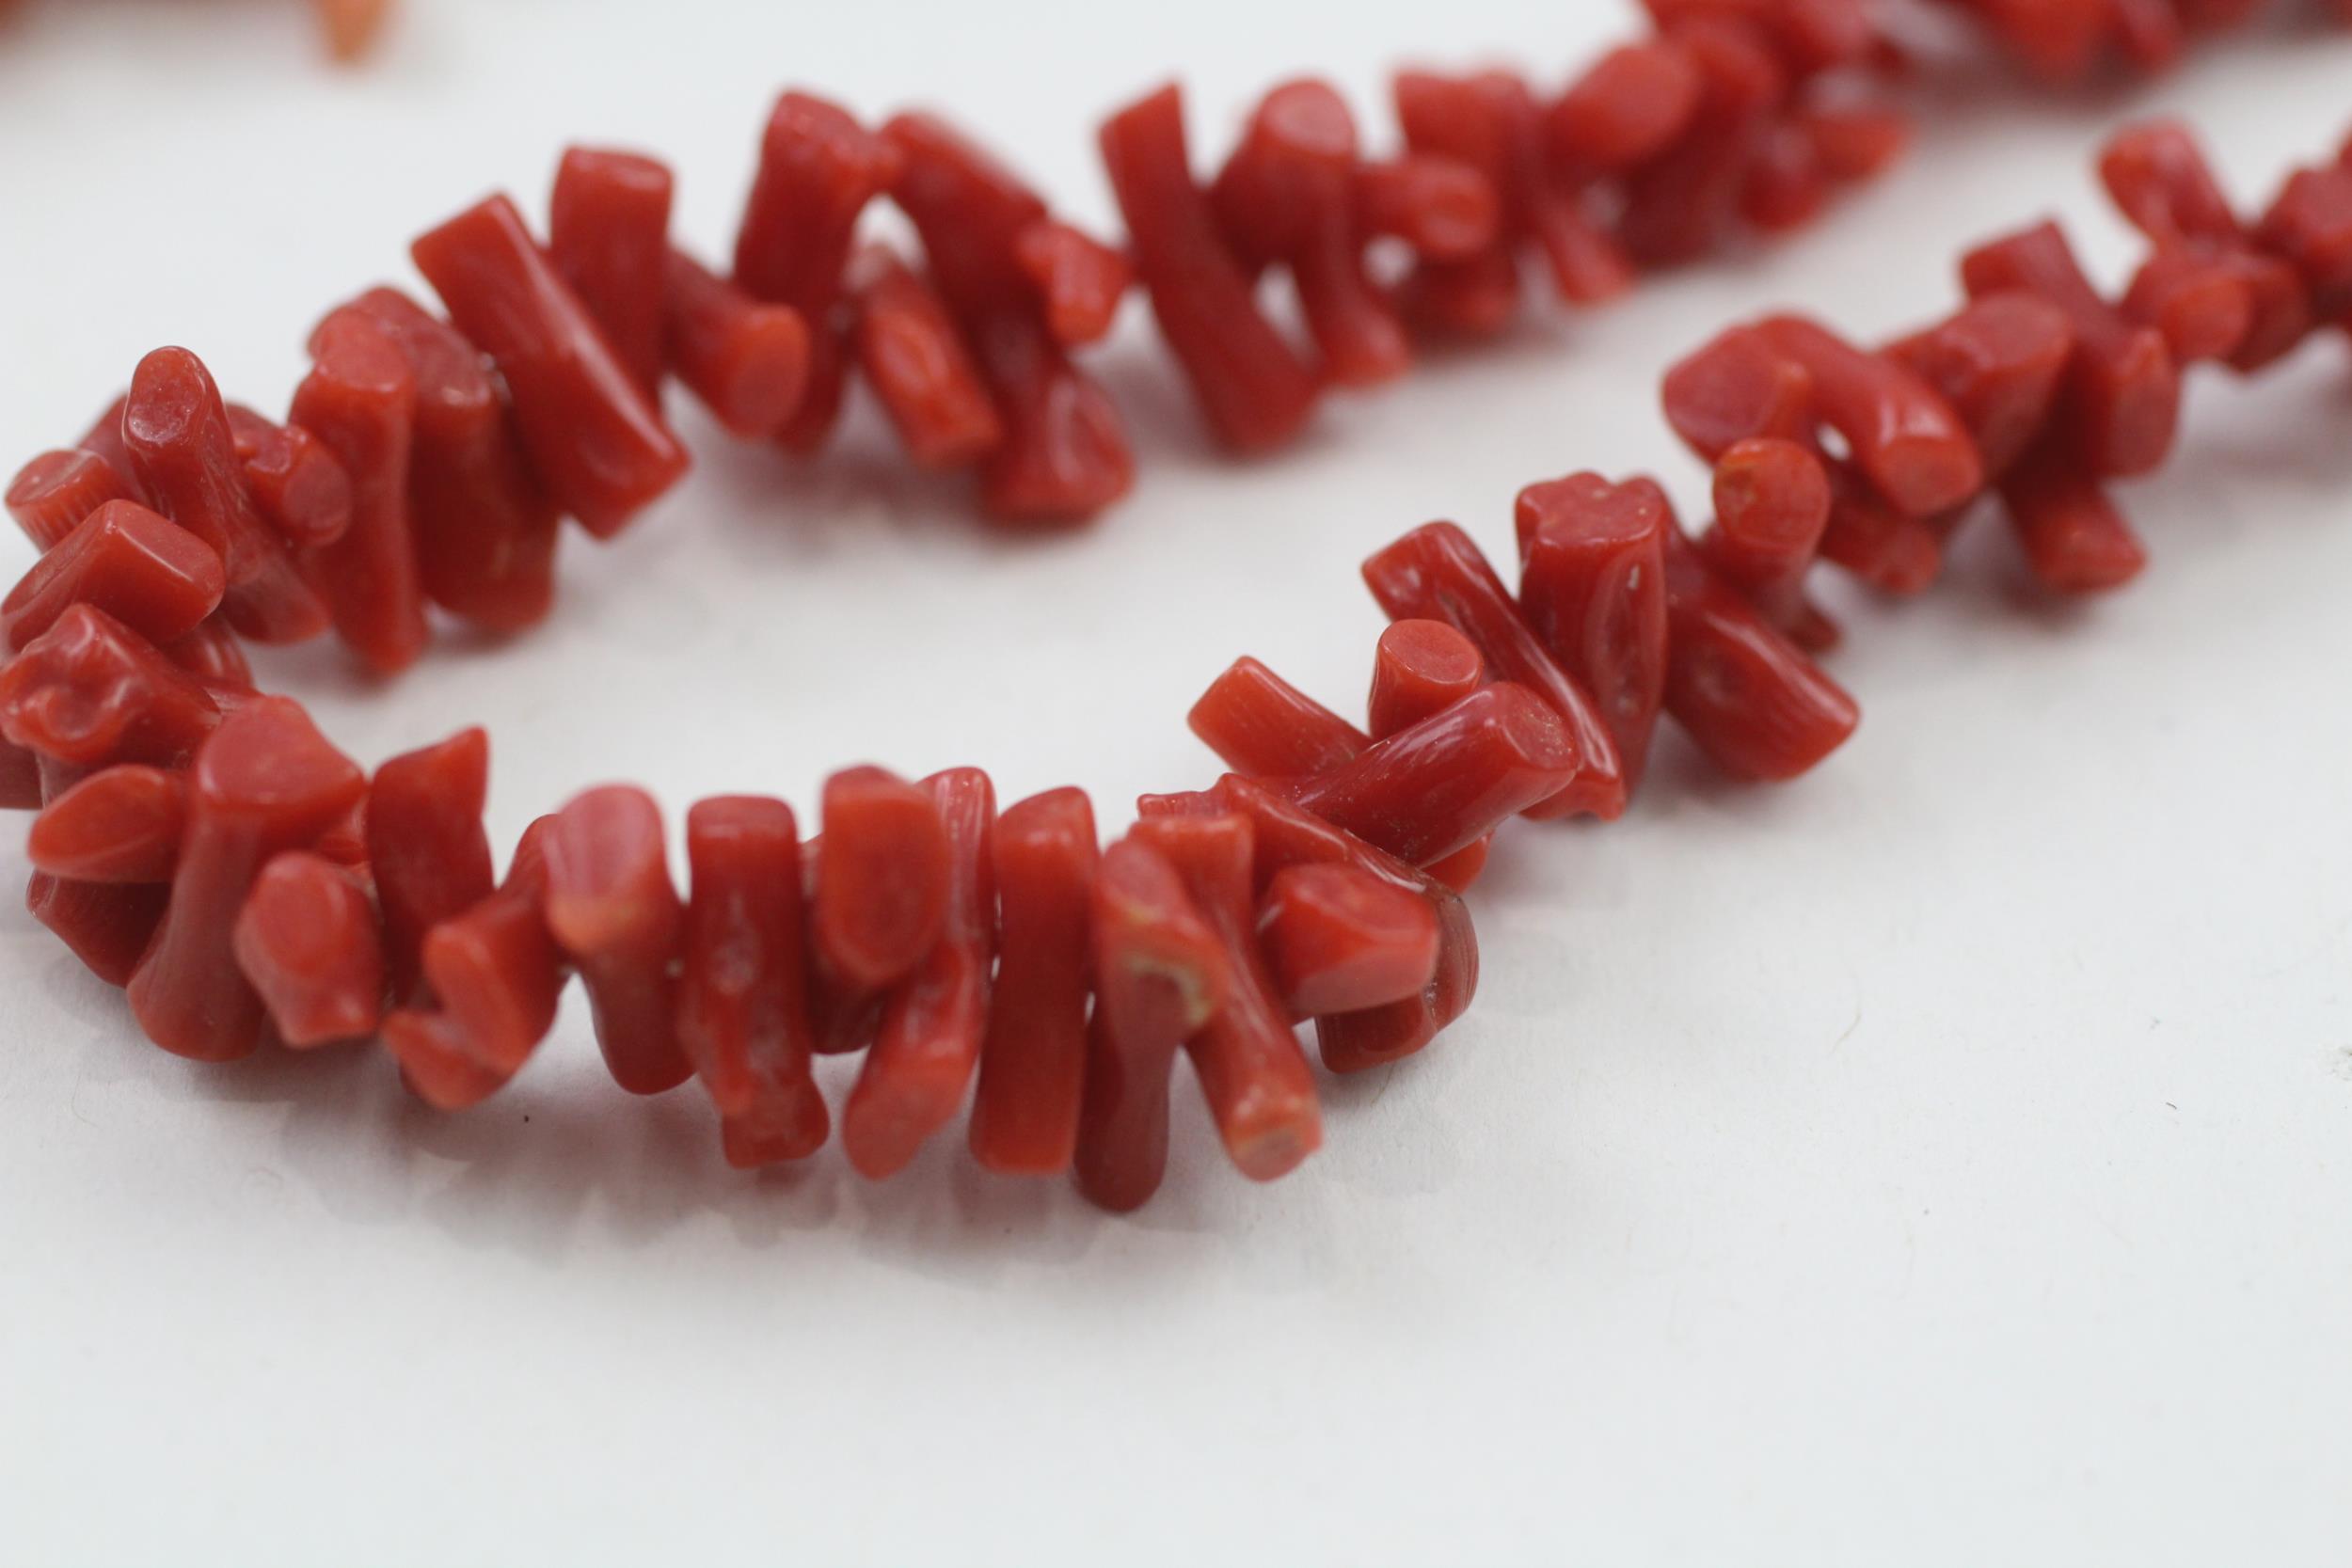 2 x 9ct gold clasp coral necklaces (56.5g) - Image 5 of 7